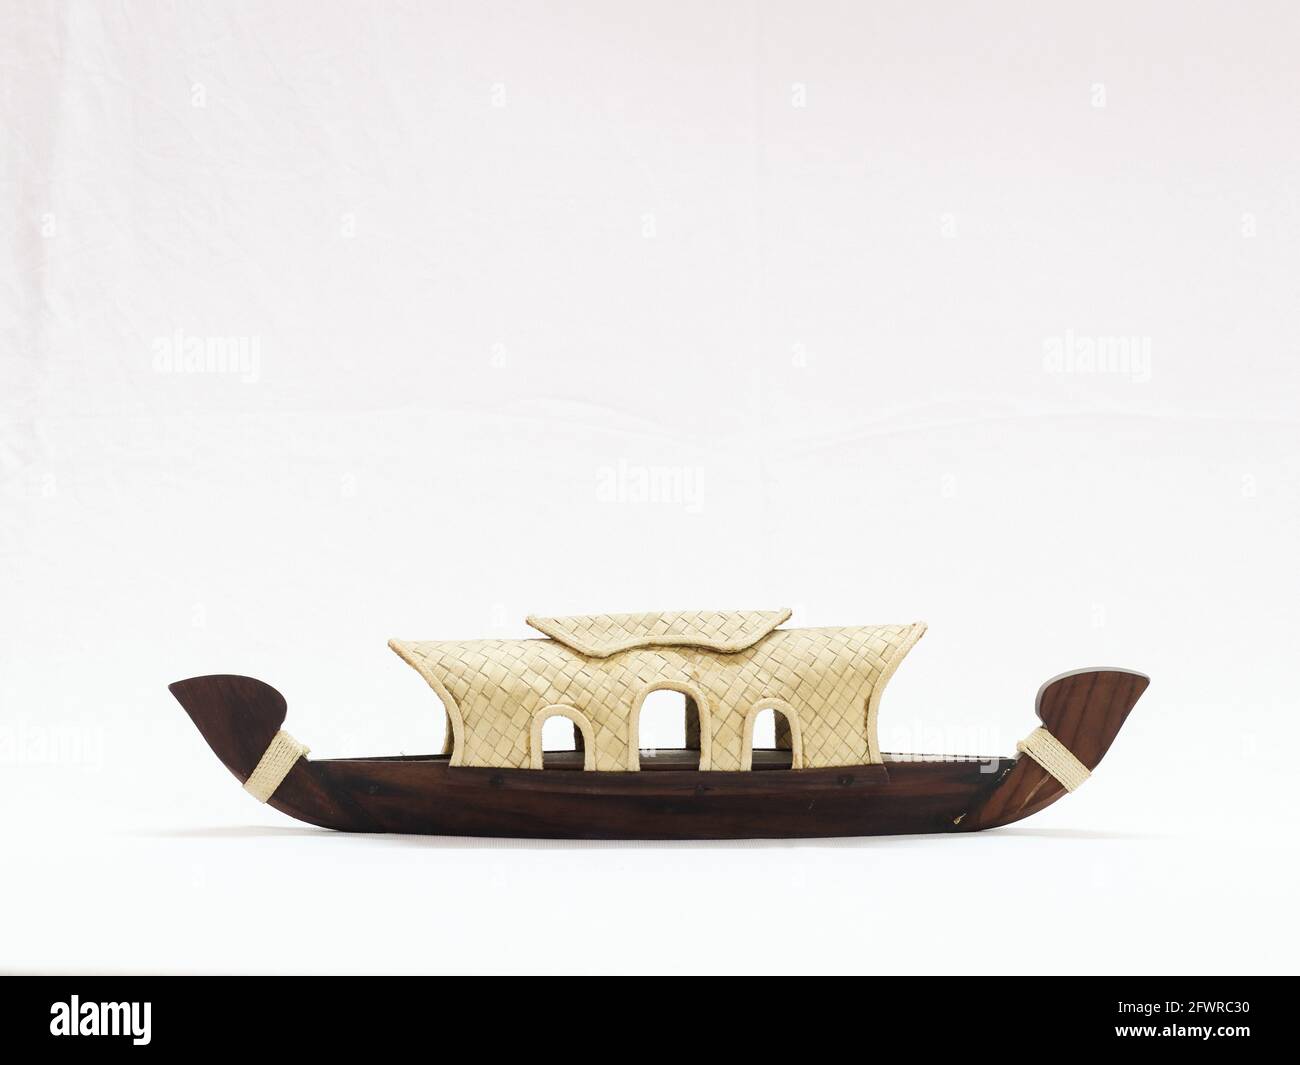 miniature kerala houseboat toy isolated in a white background Stock Photo